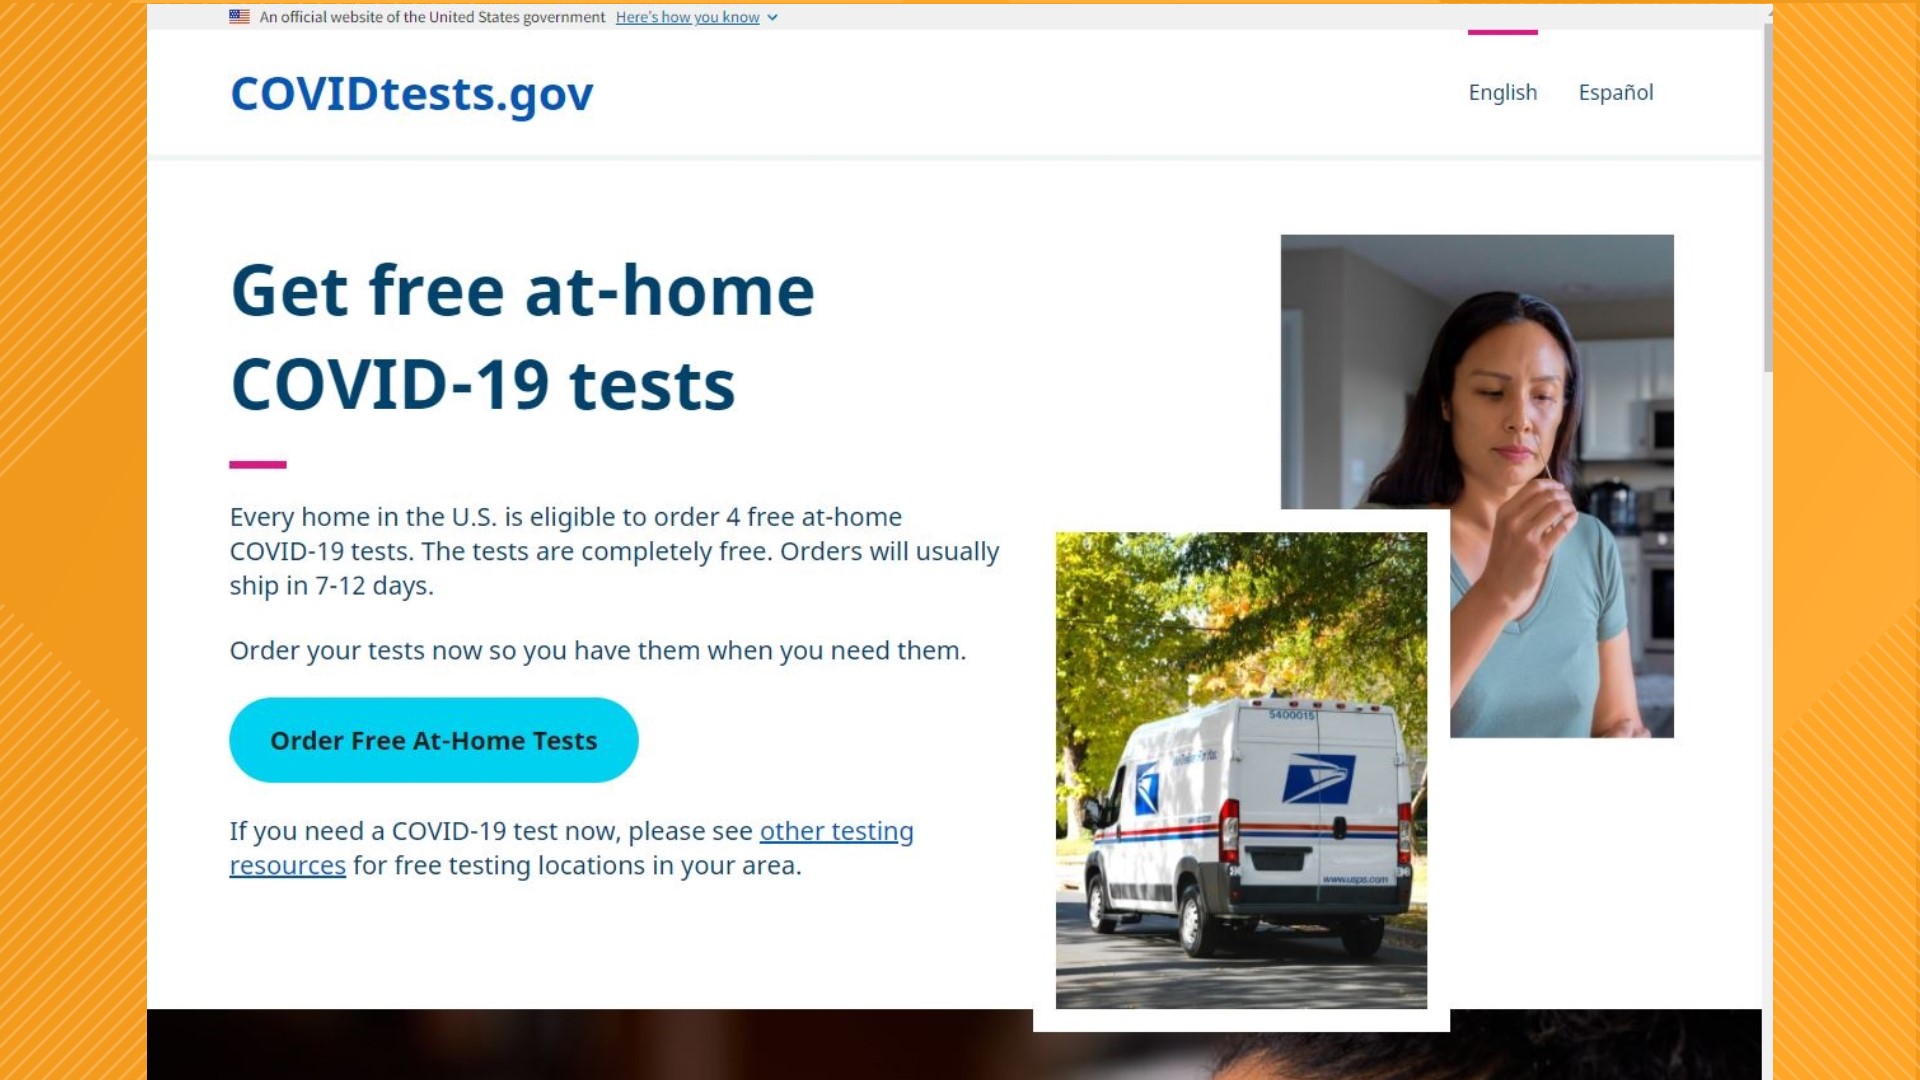 How to order free athome COVID tests from the federal government